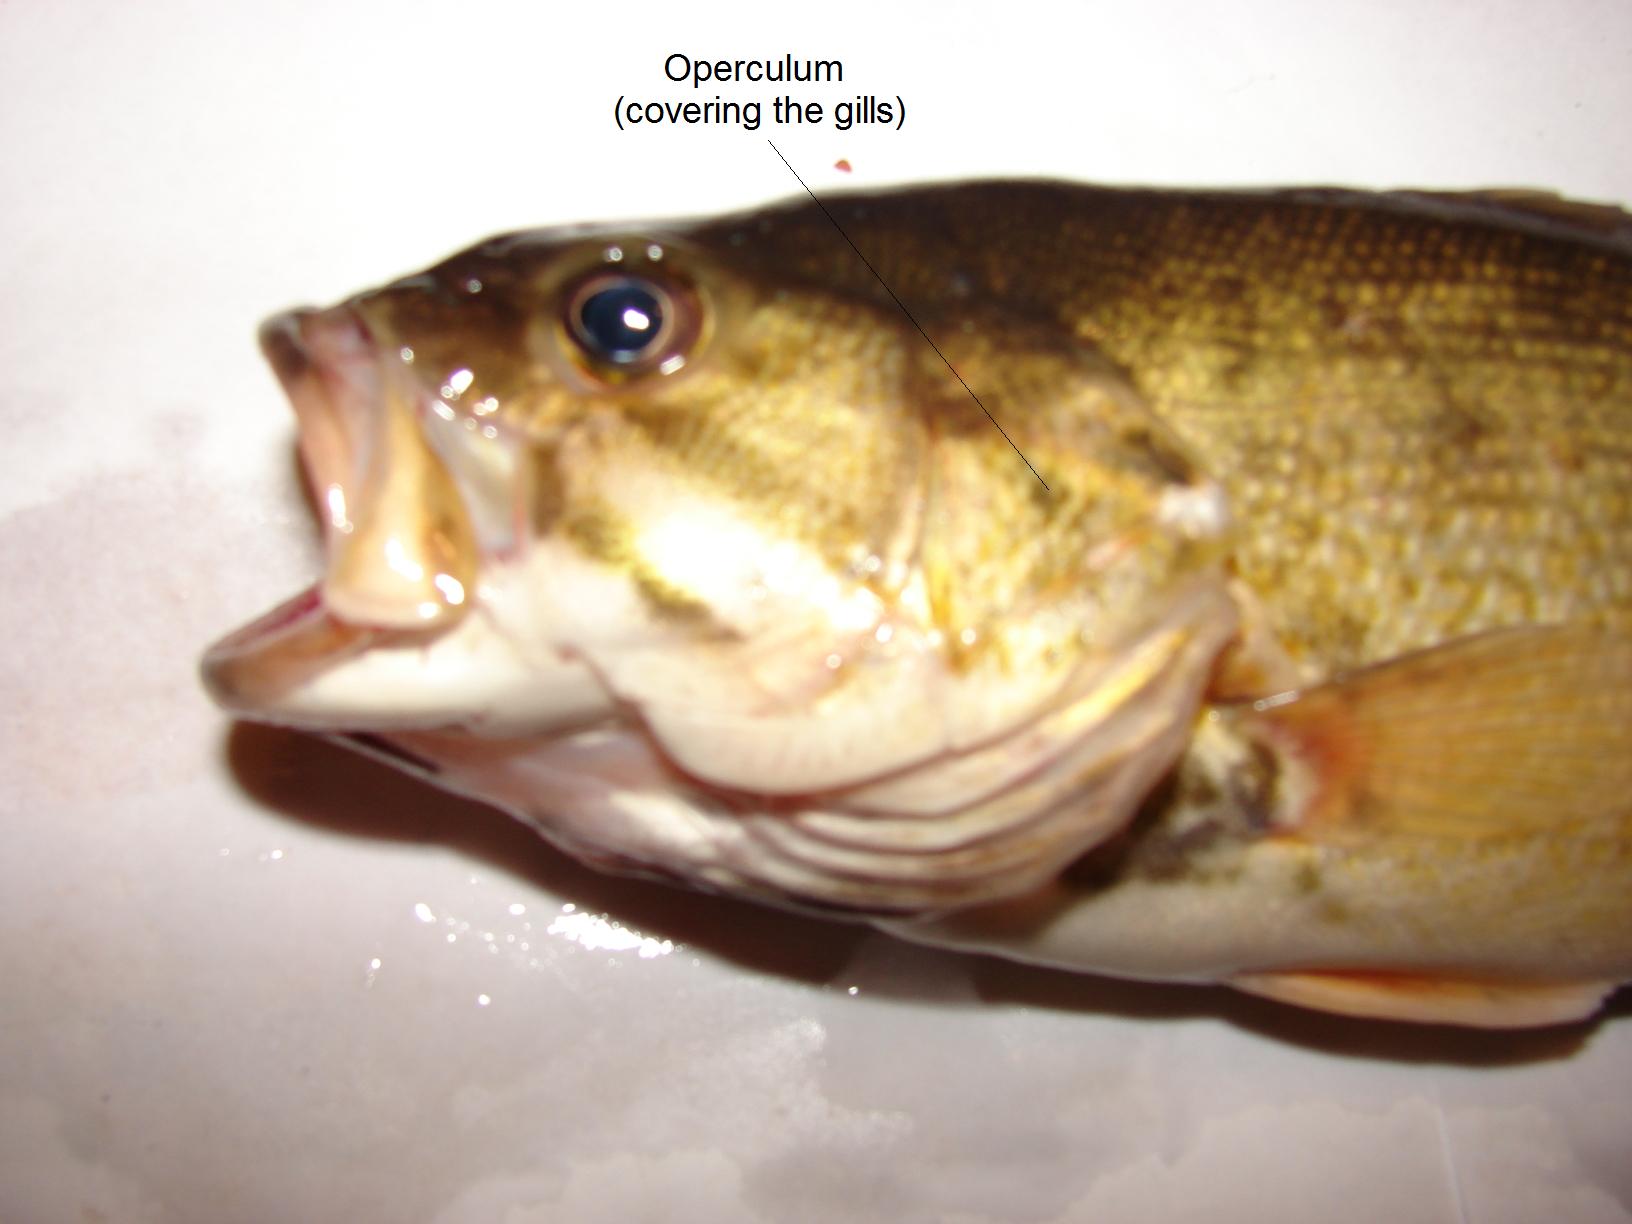 The operculum of a smallmouth bass; I took this photo prior to dissection